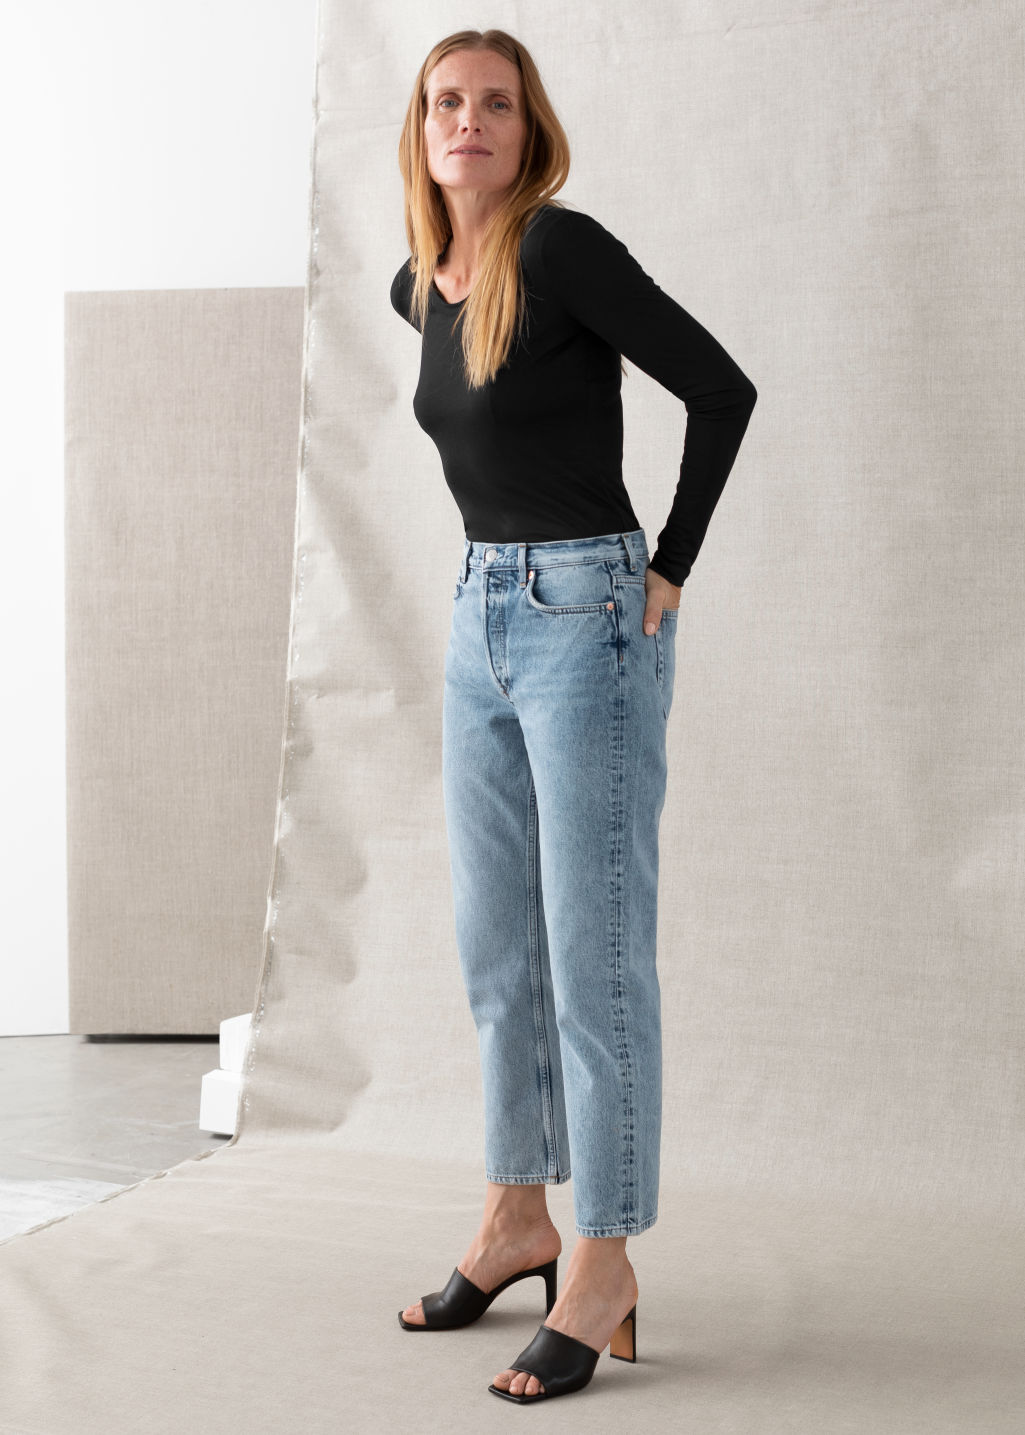 Keeper Cut Cropped Jeans - Grey - Jeans - & Other Stories